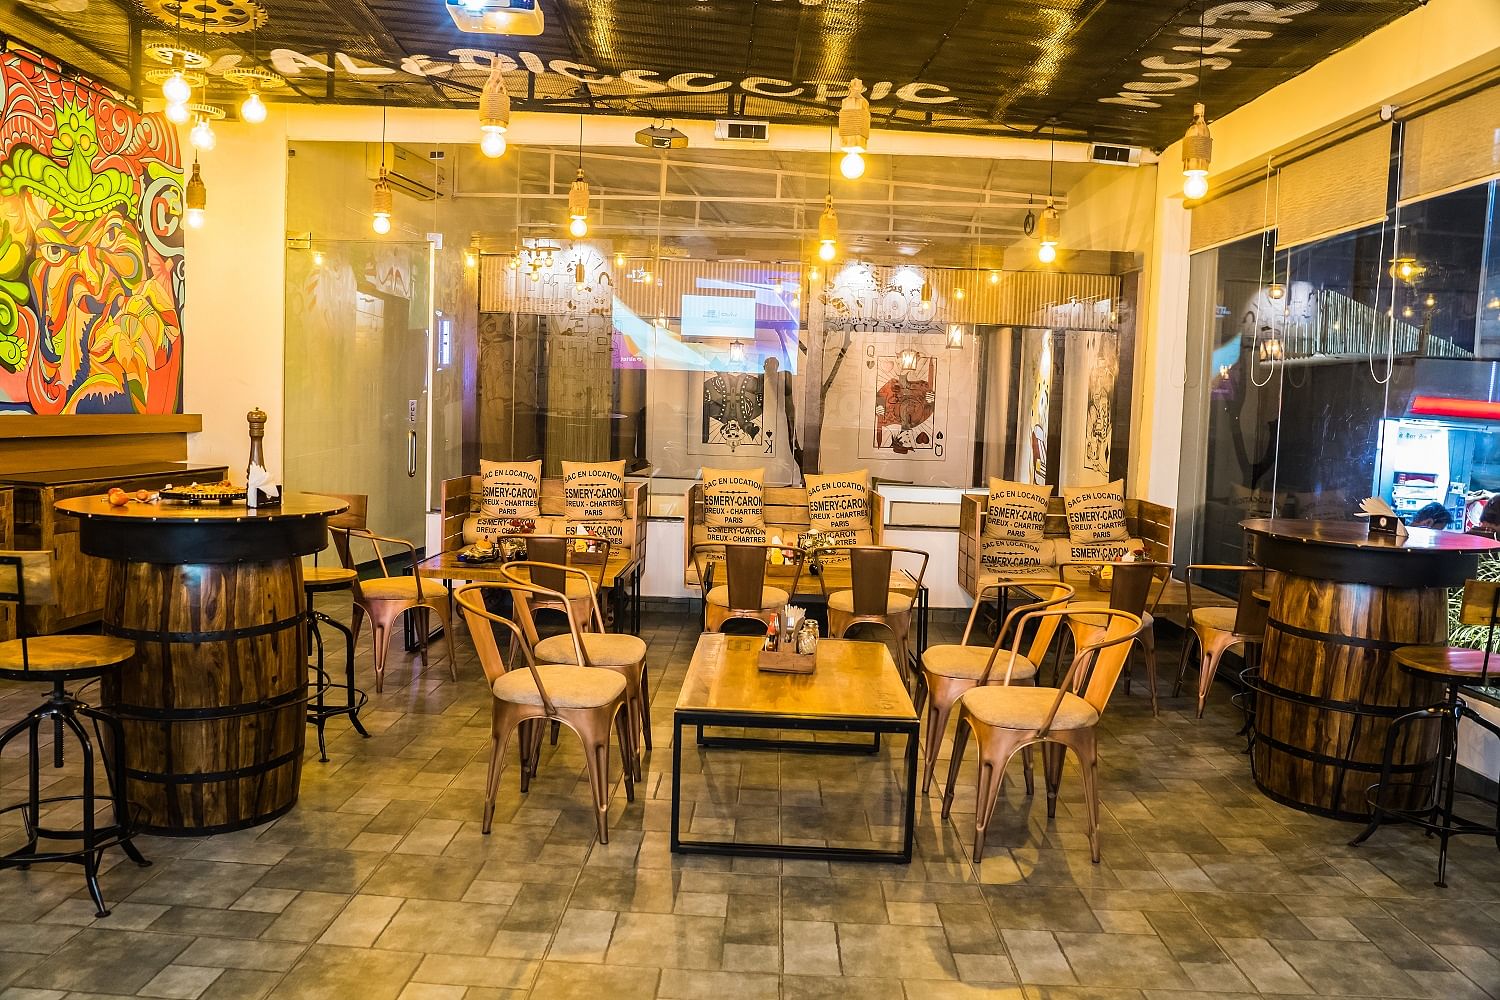 C Square Cafe in Golf Course Road, Gurgaon